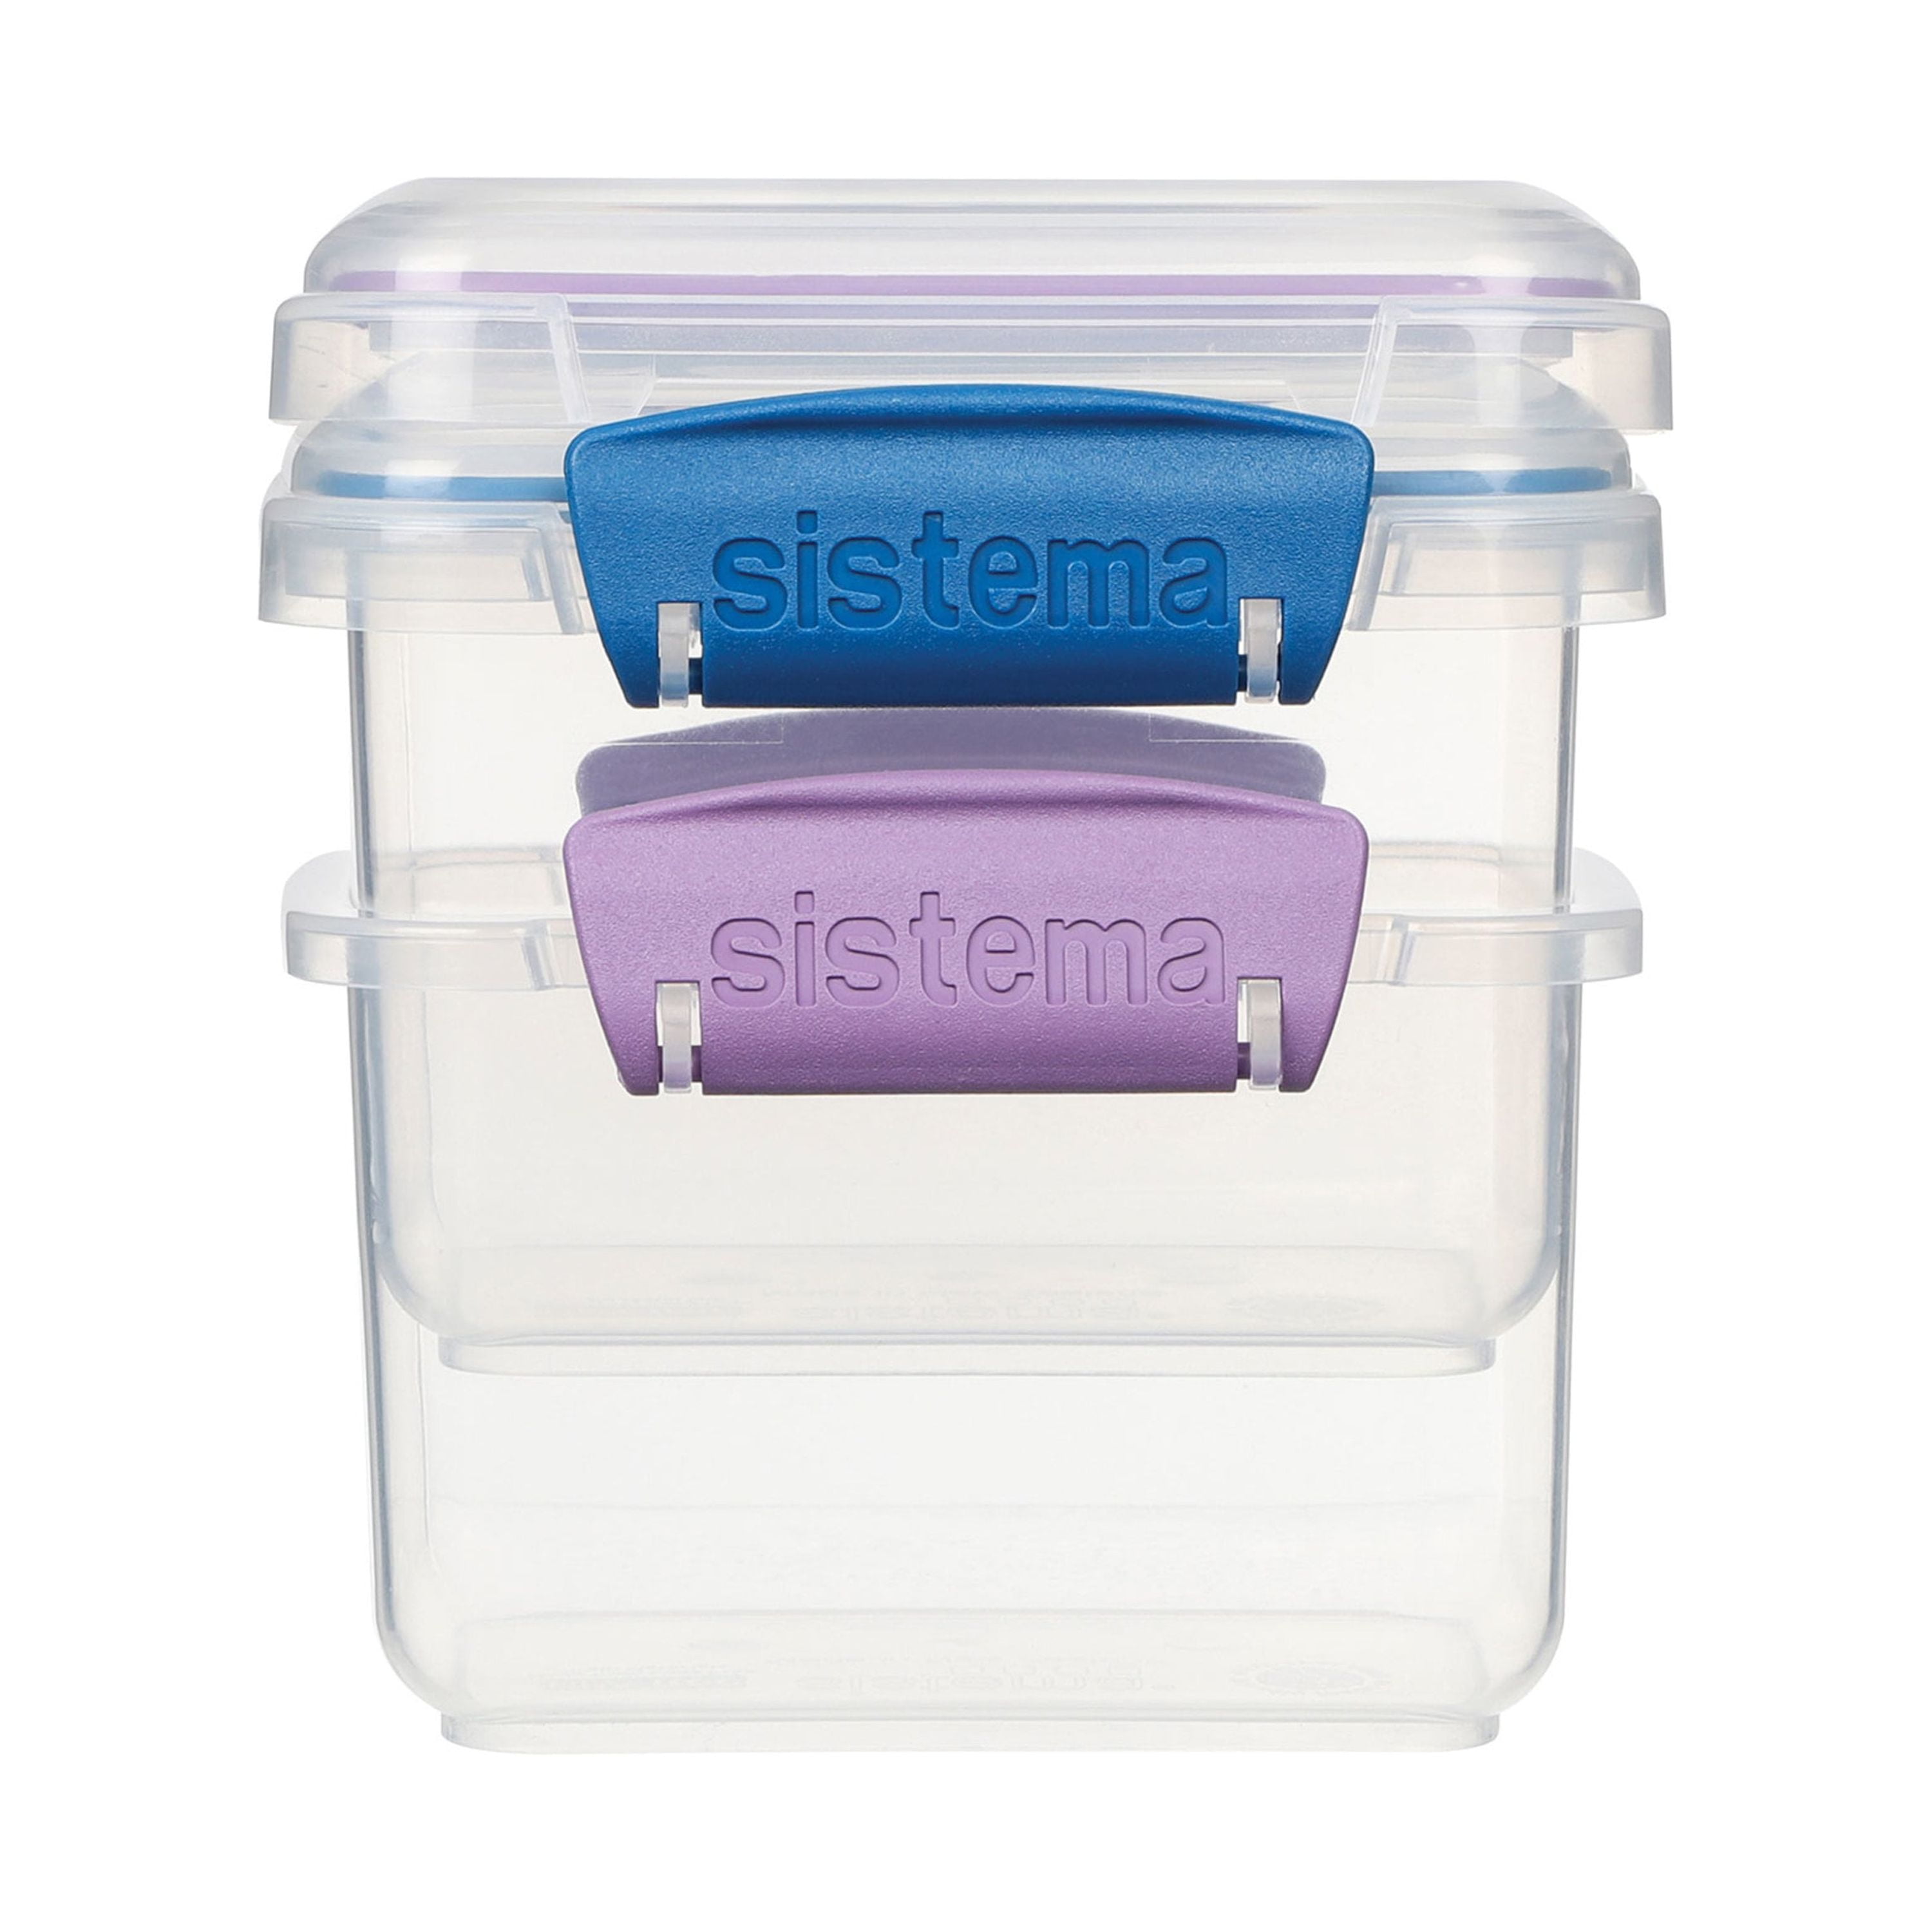 Sistema Food Storage Containers with Lids Set, 20 pc - Kroger